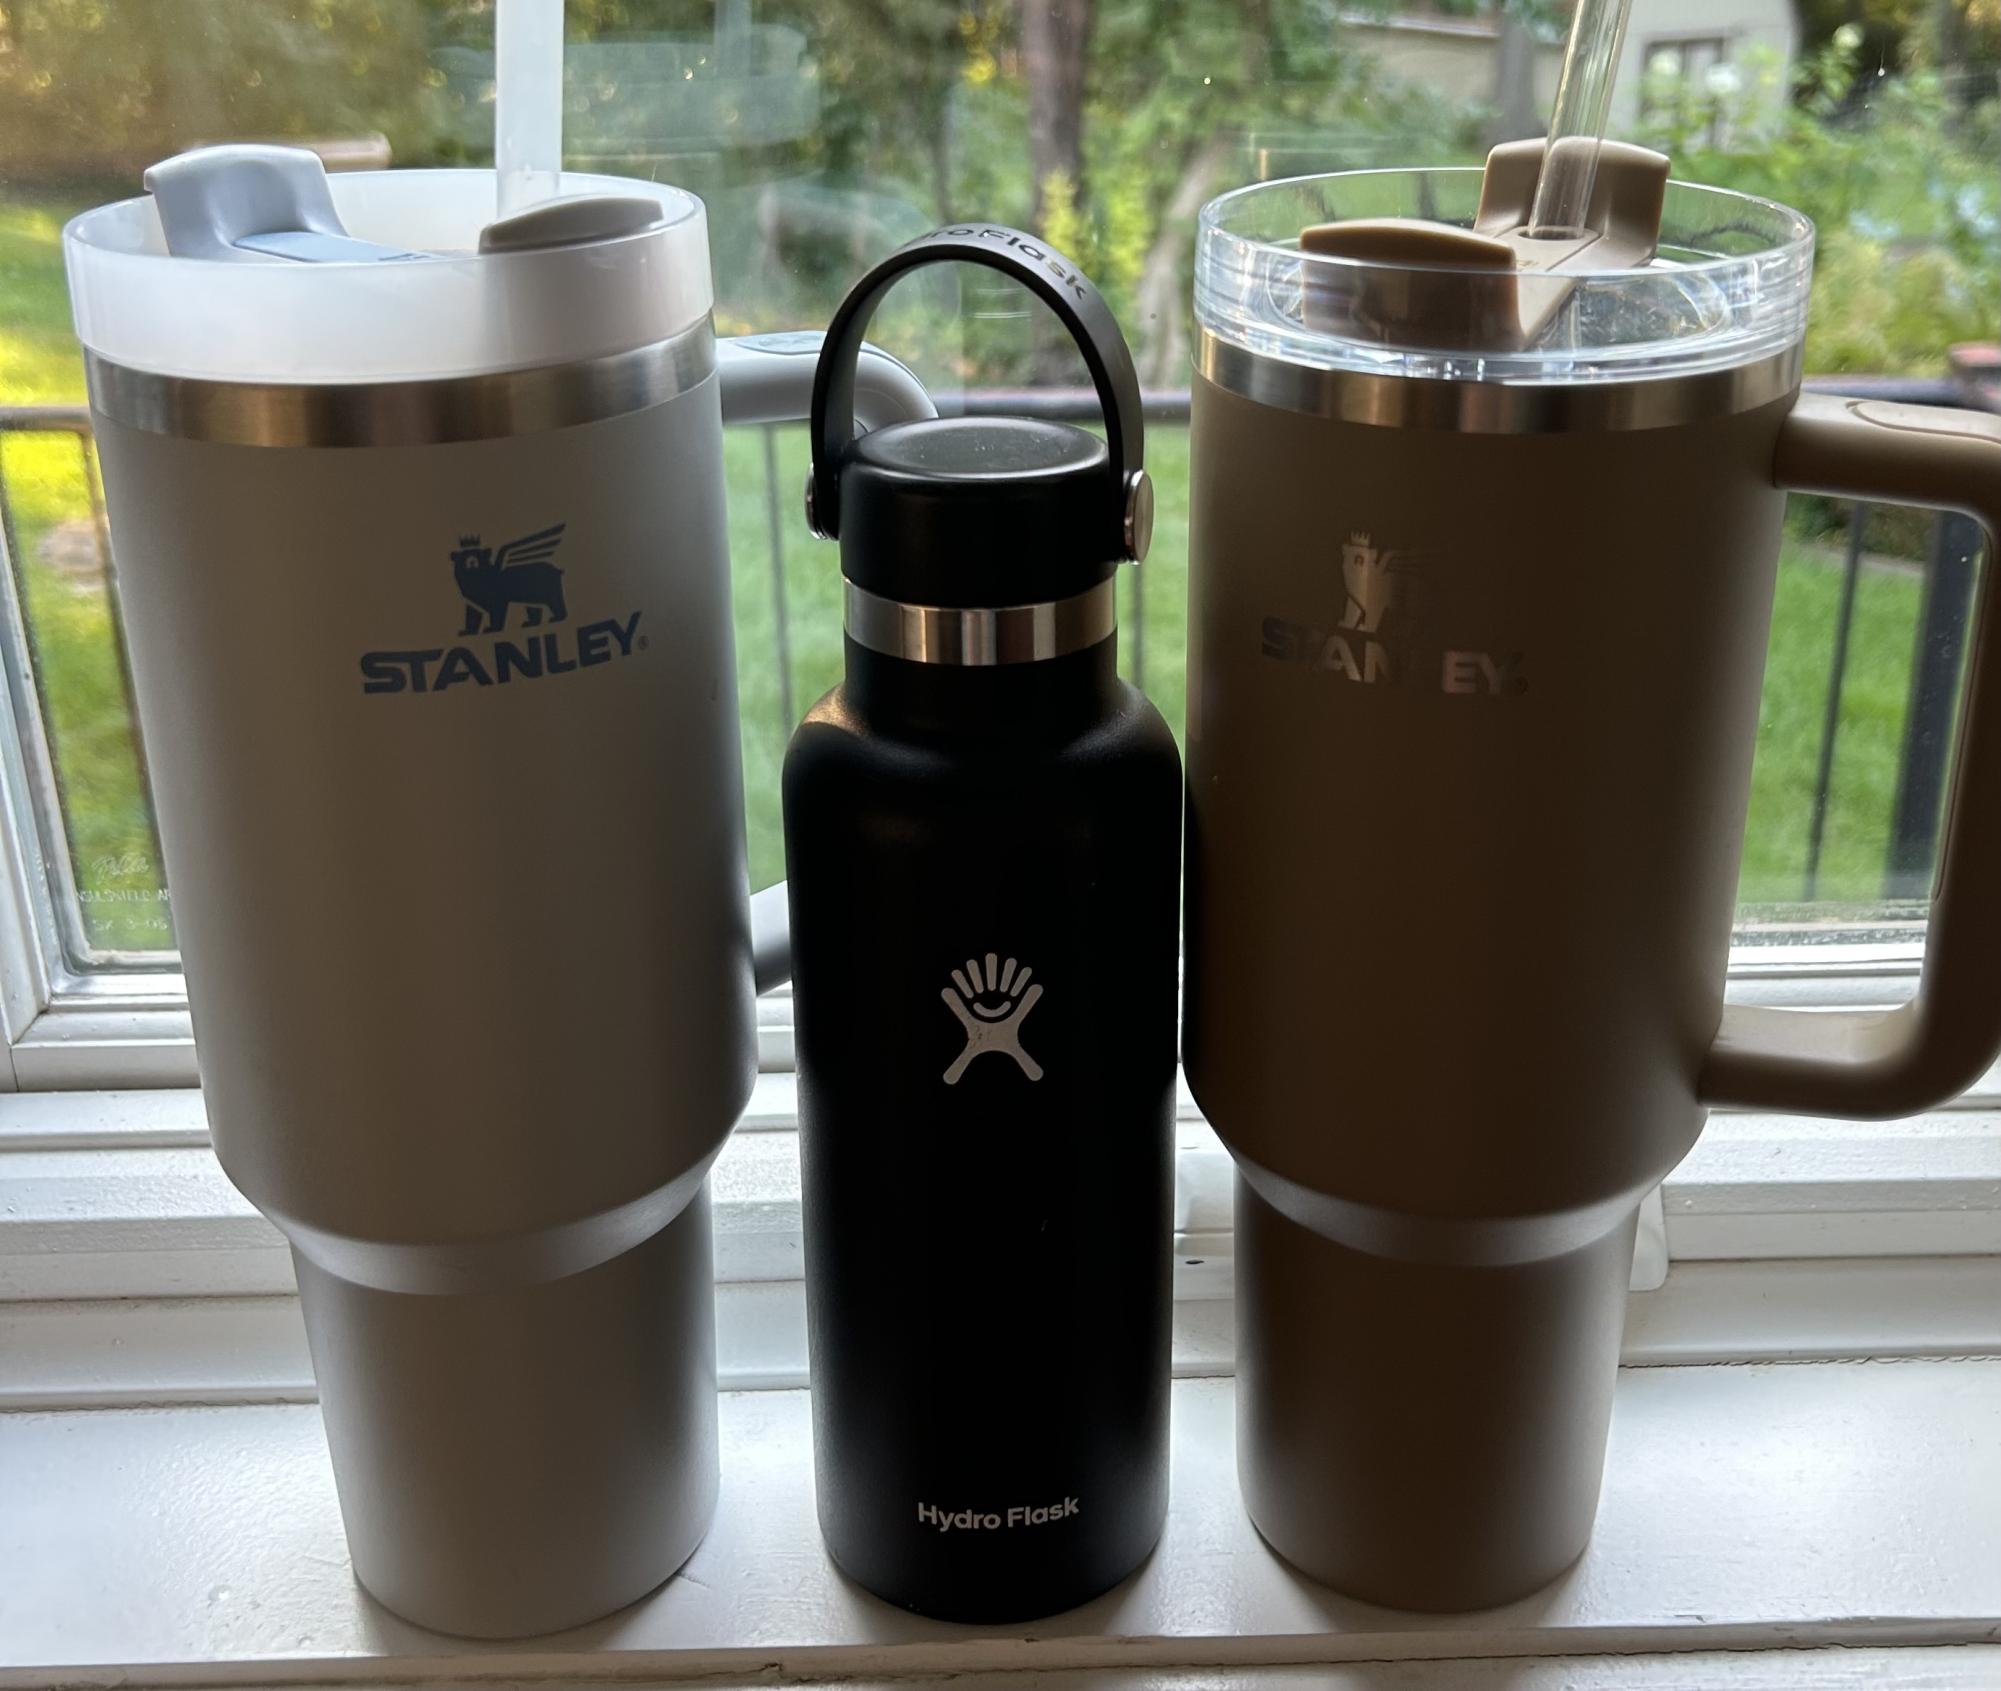 Which Water Container is the Best: Stanley Cups or Hydro Flasks?